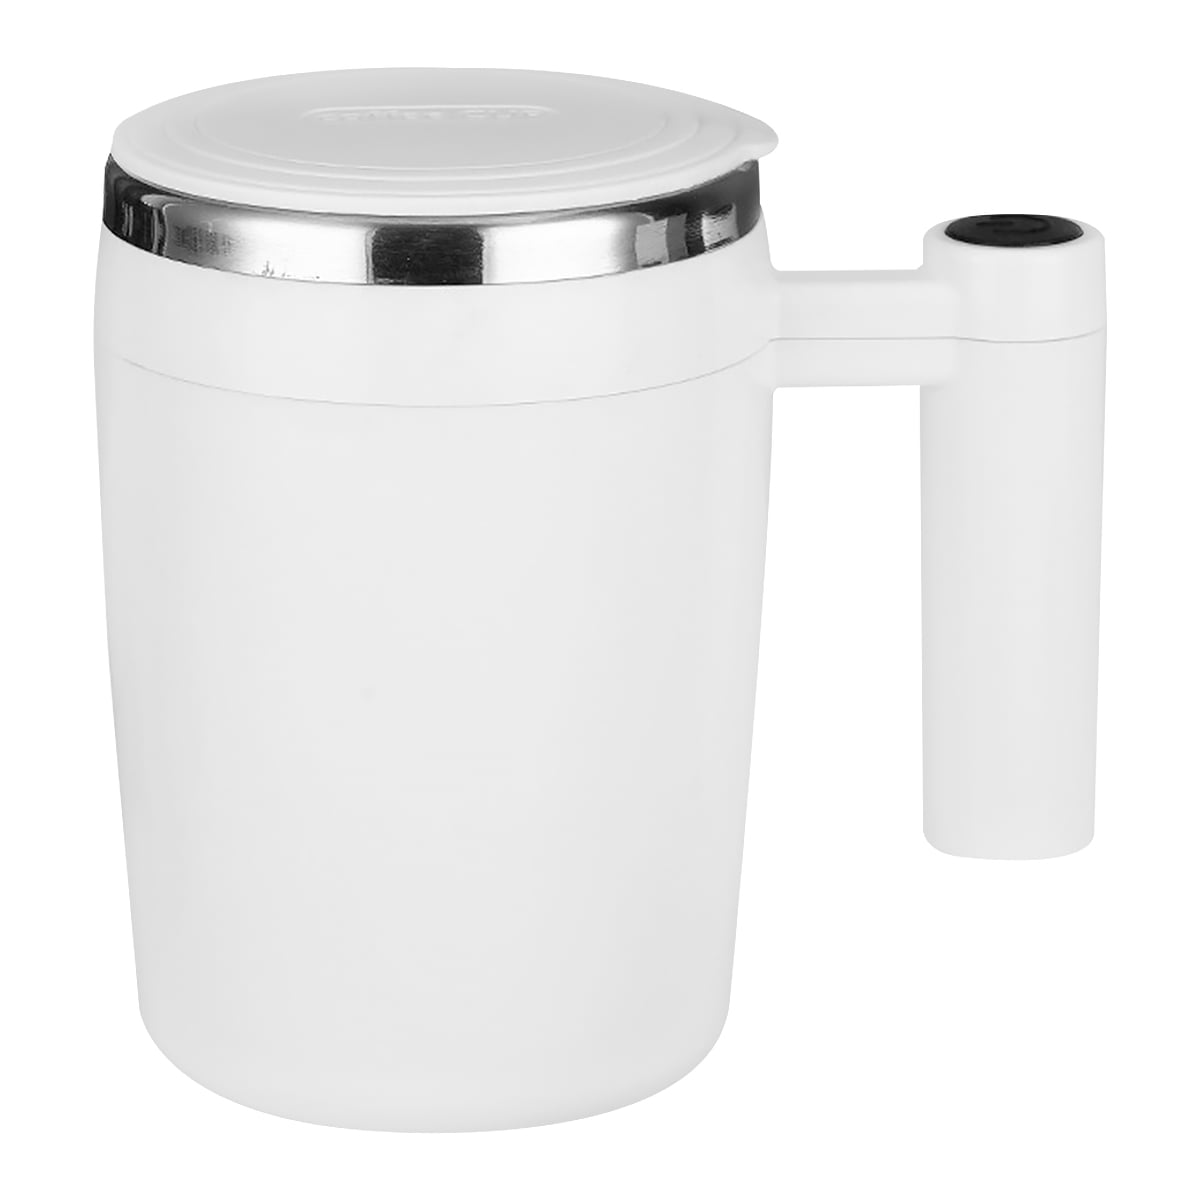 Auto Stirring Mug Battery Operate Self Mixing Cup for Travel Gym Coffee  Juice